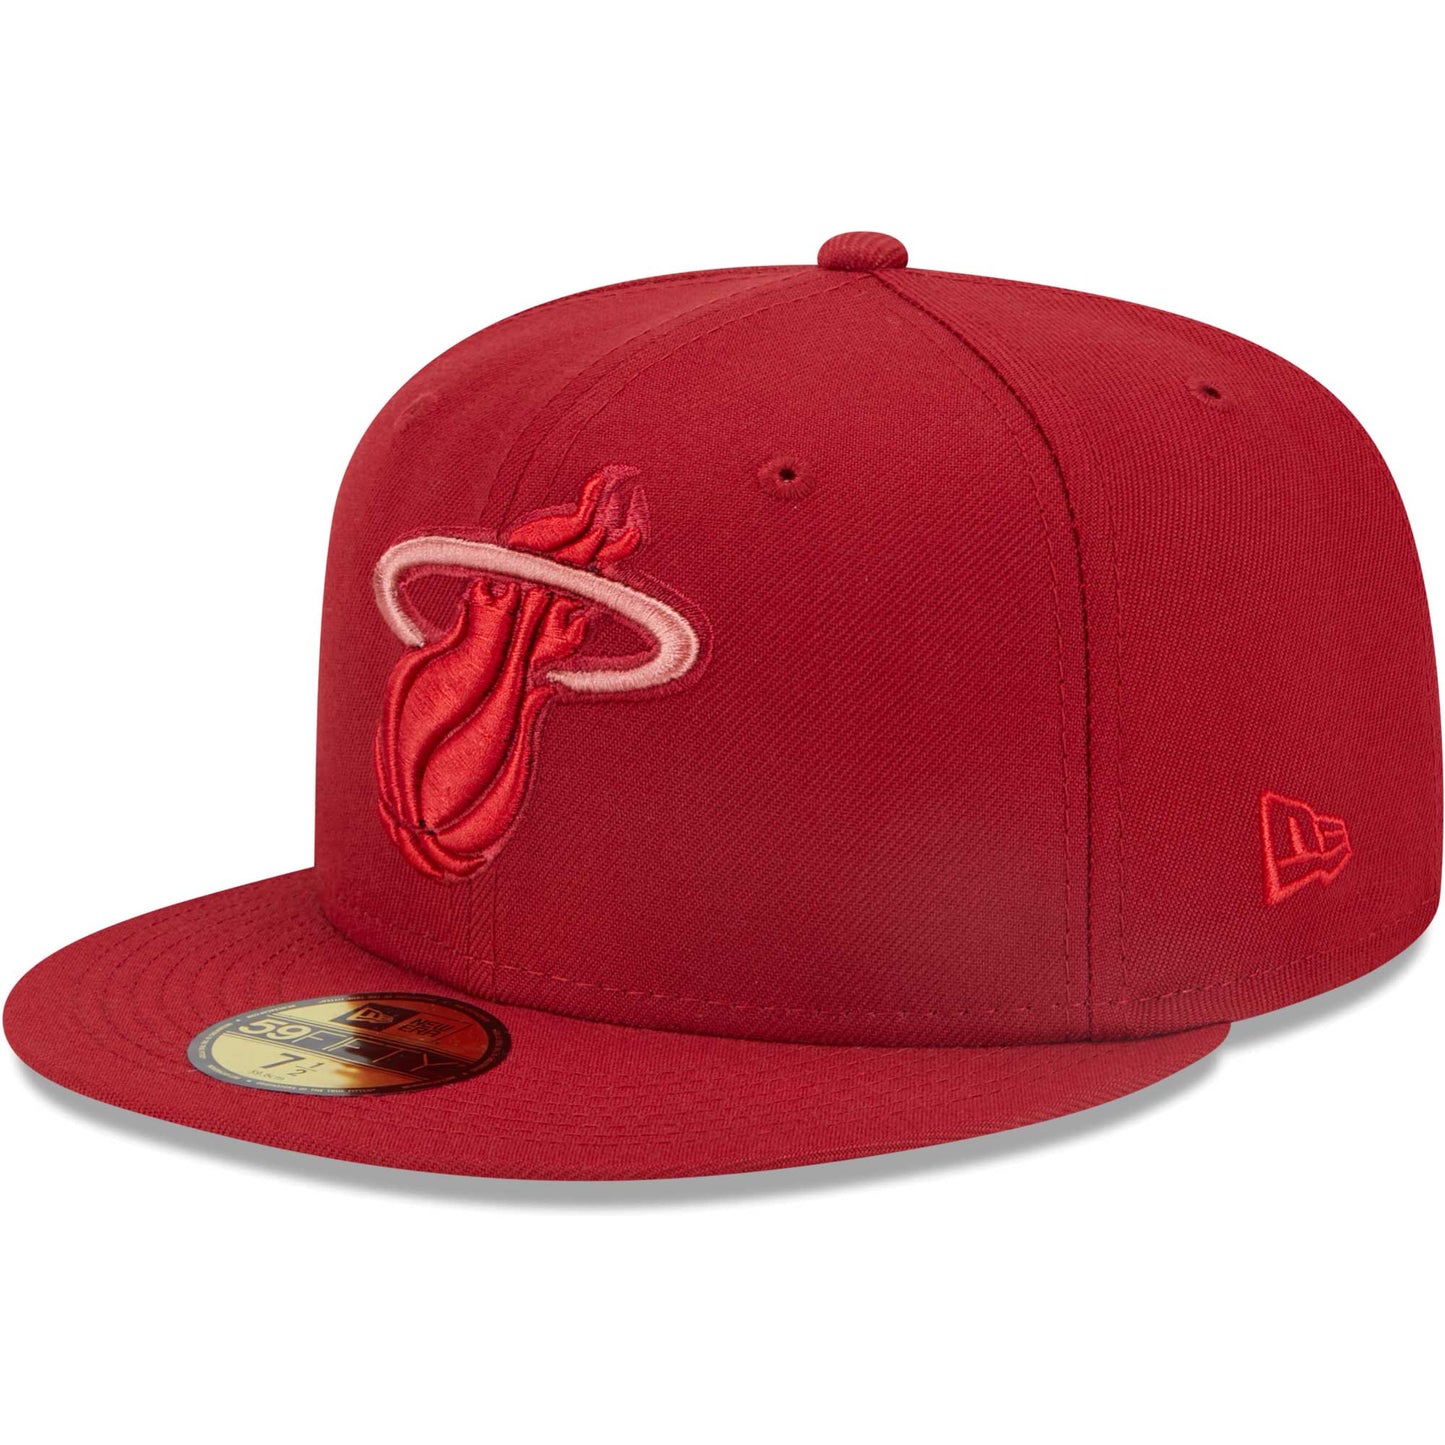 Miami Heat New Era Monocamo 59FIFTY Fitted Hat - Red